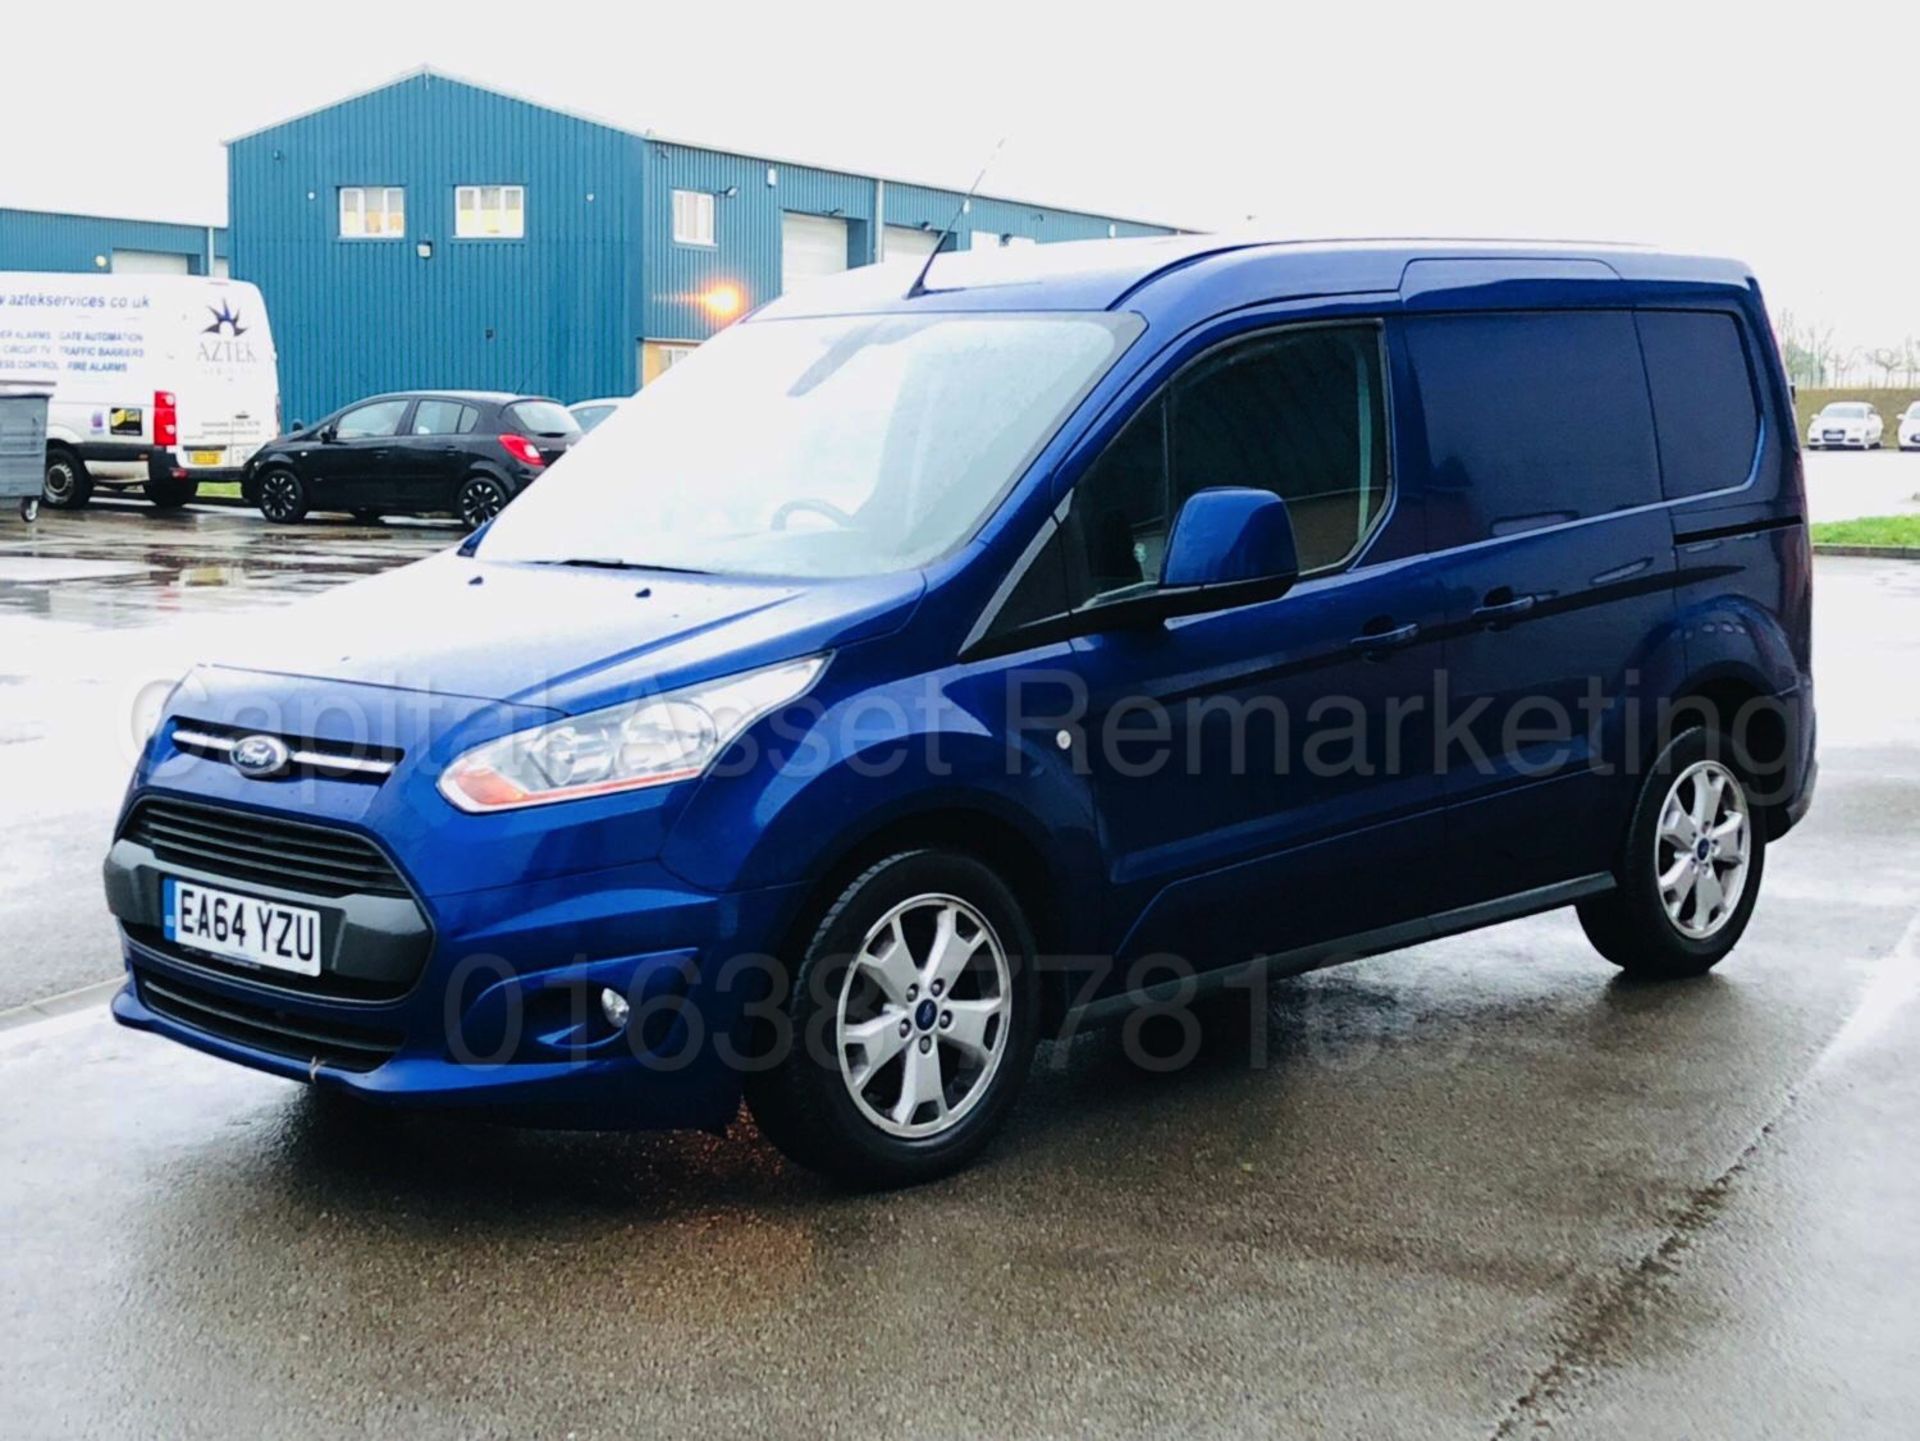 FORD TRANSIT CONNECT 'LIMITED' (2015 - FACELIFT MODEL) '1.6 TDCI - 115 PS - 6 SPEED' *A/C* (1 OWNER)